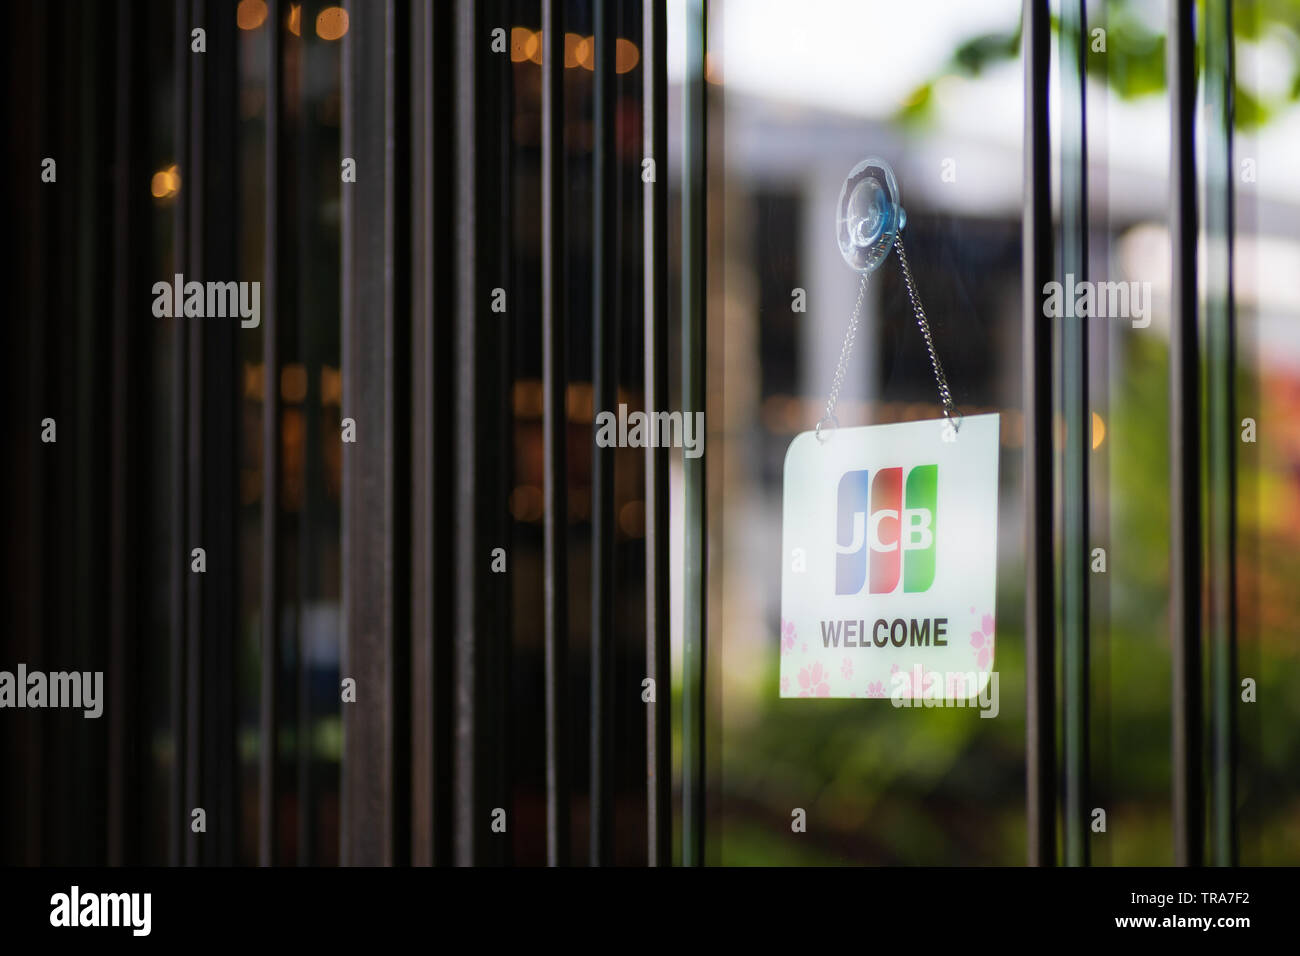 Bangkok, Thailand - May 26, 2019: JCB credit cards and welcome sign hangs in front of a shopping store in in Bangkok, Thailand. JCB is a credit card c Stock Photo